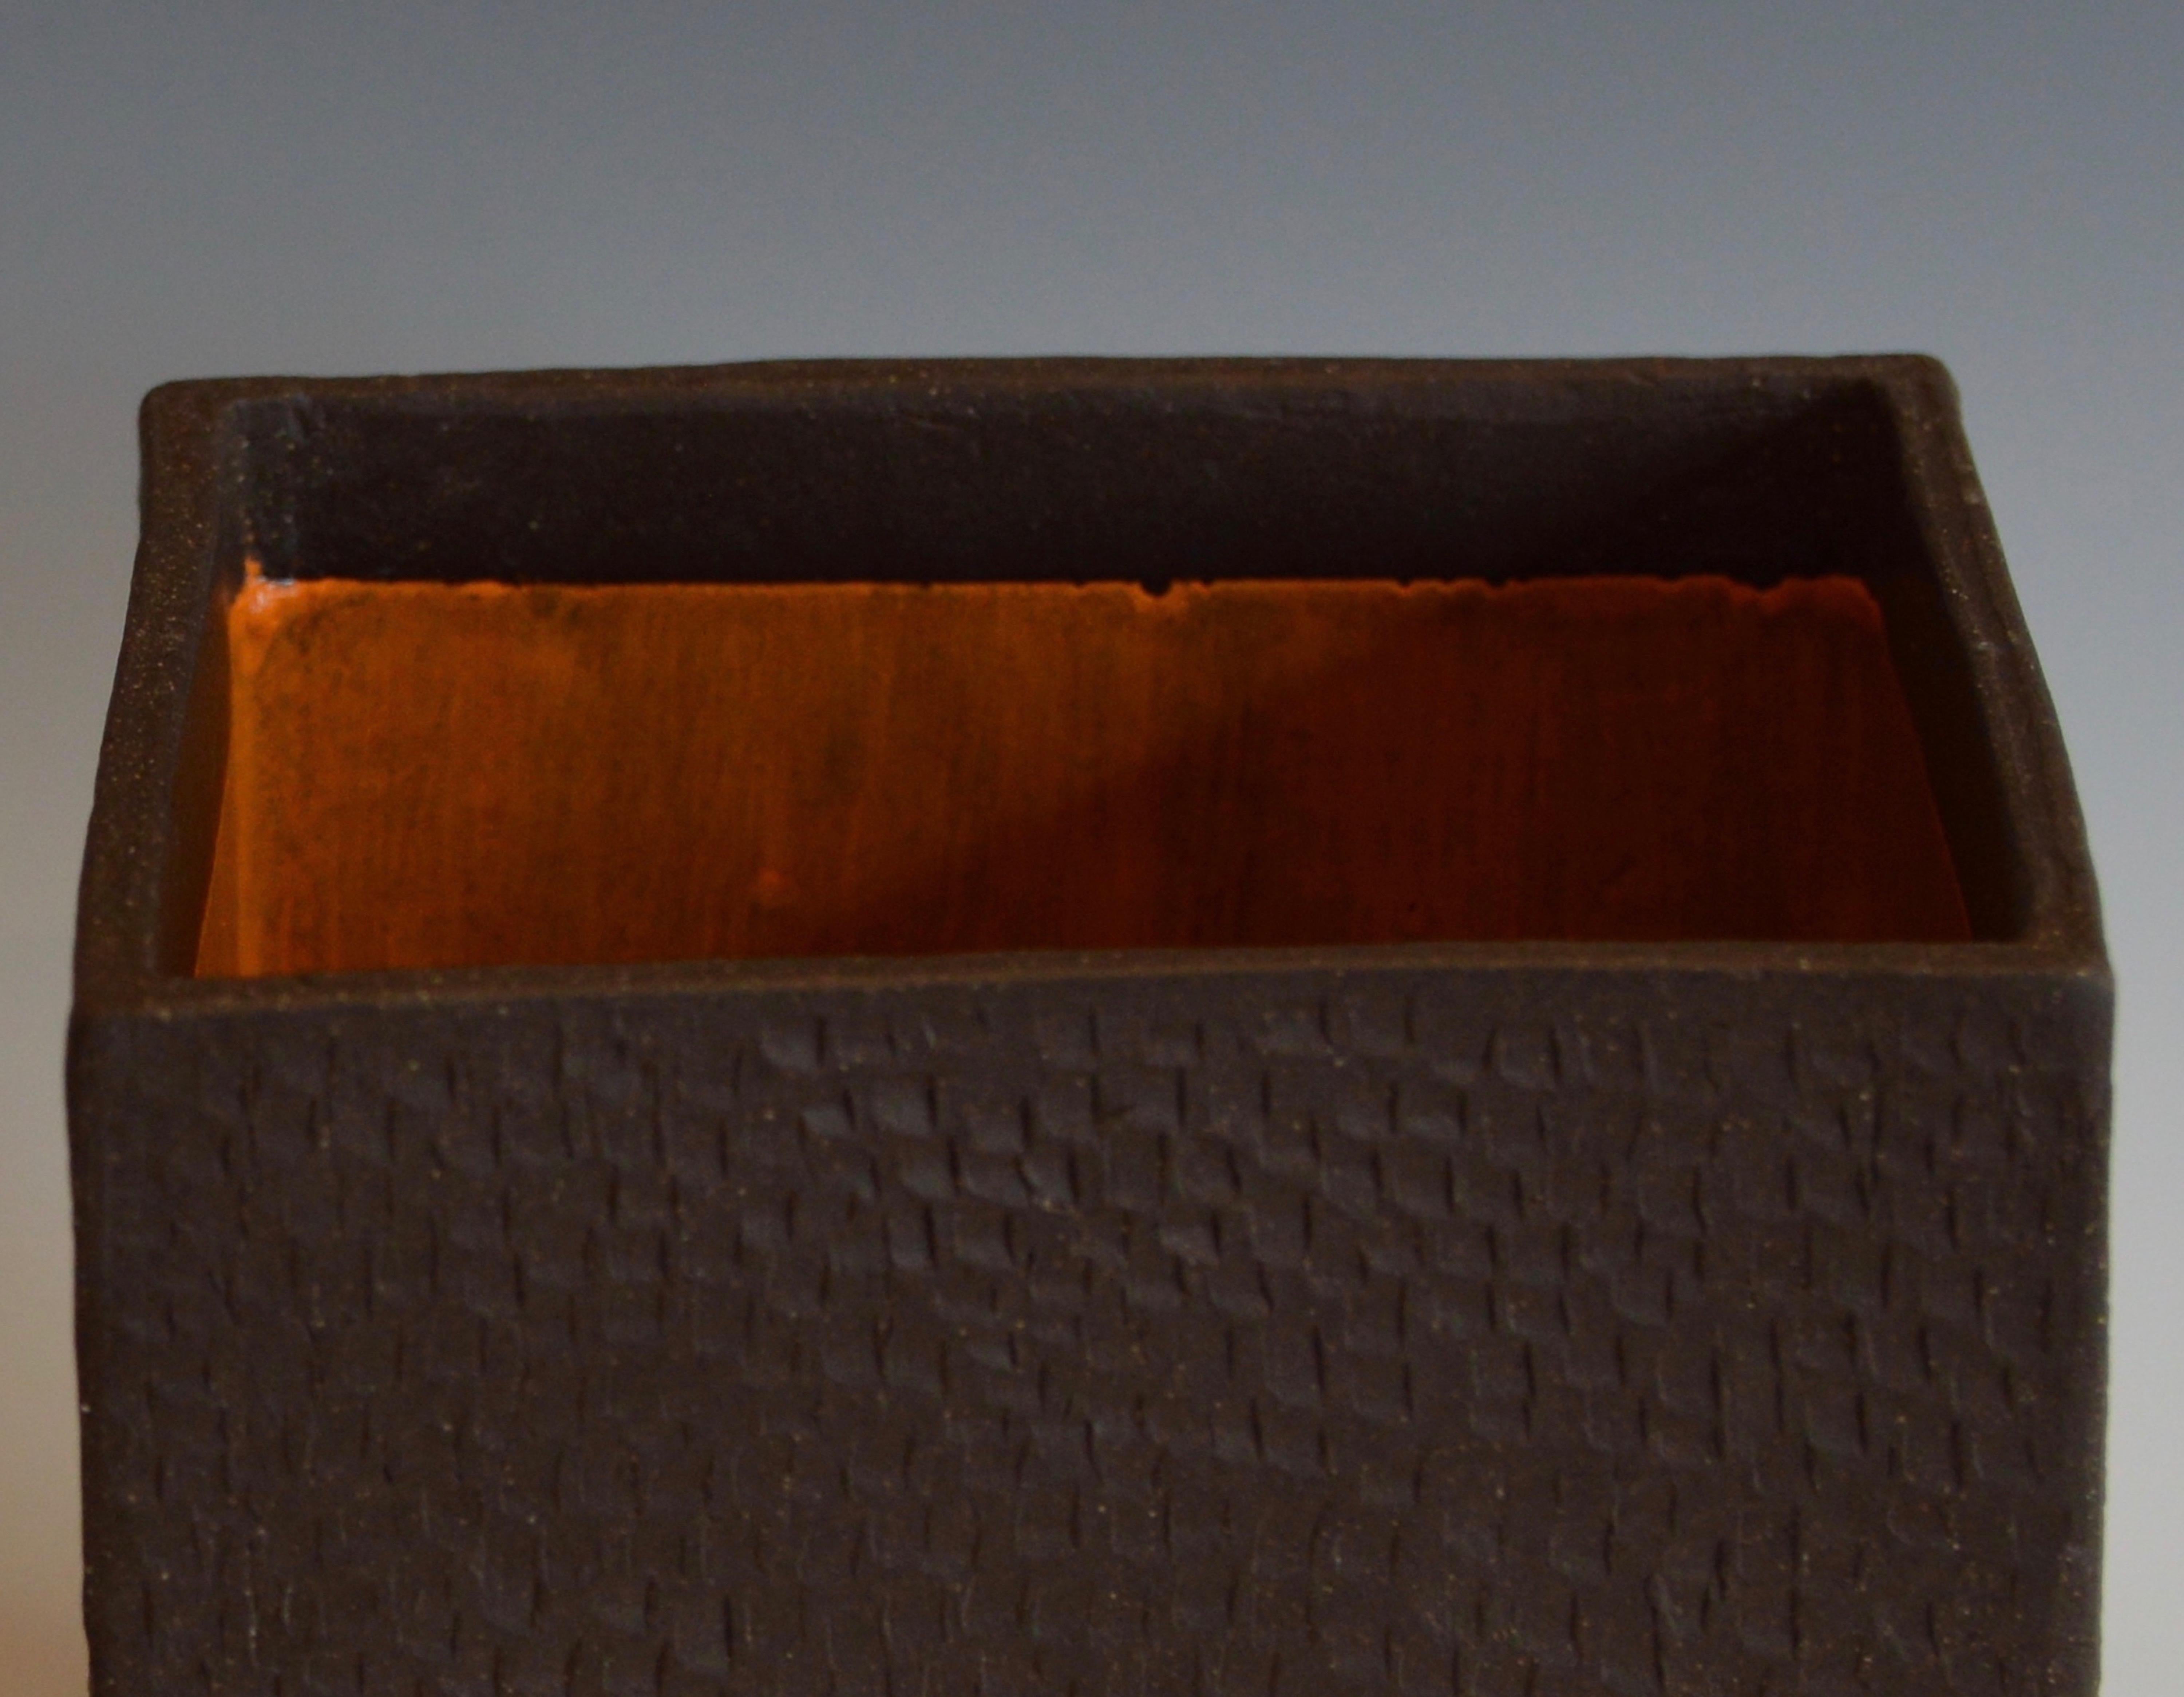 Hand-Textured Box in Raw Brown Clay with Orange Glazed Interior and Lid 3